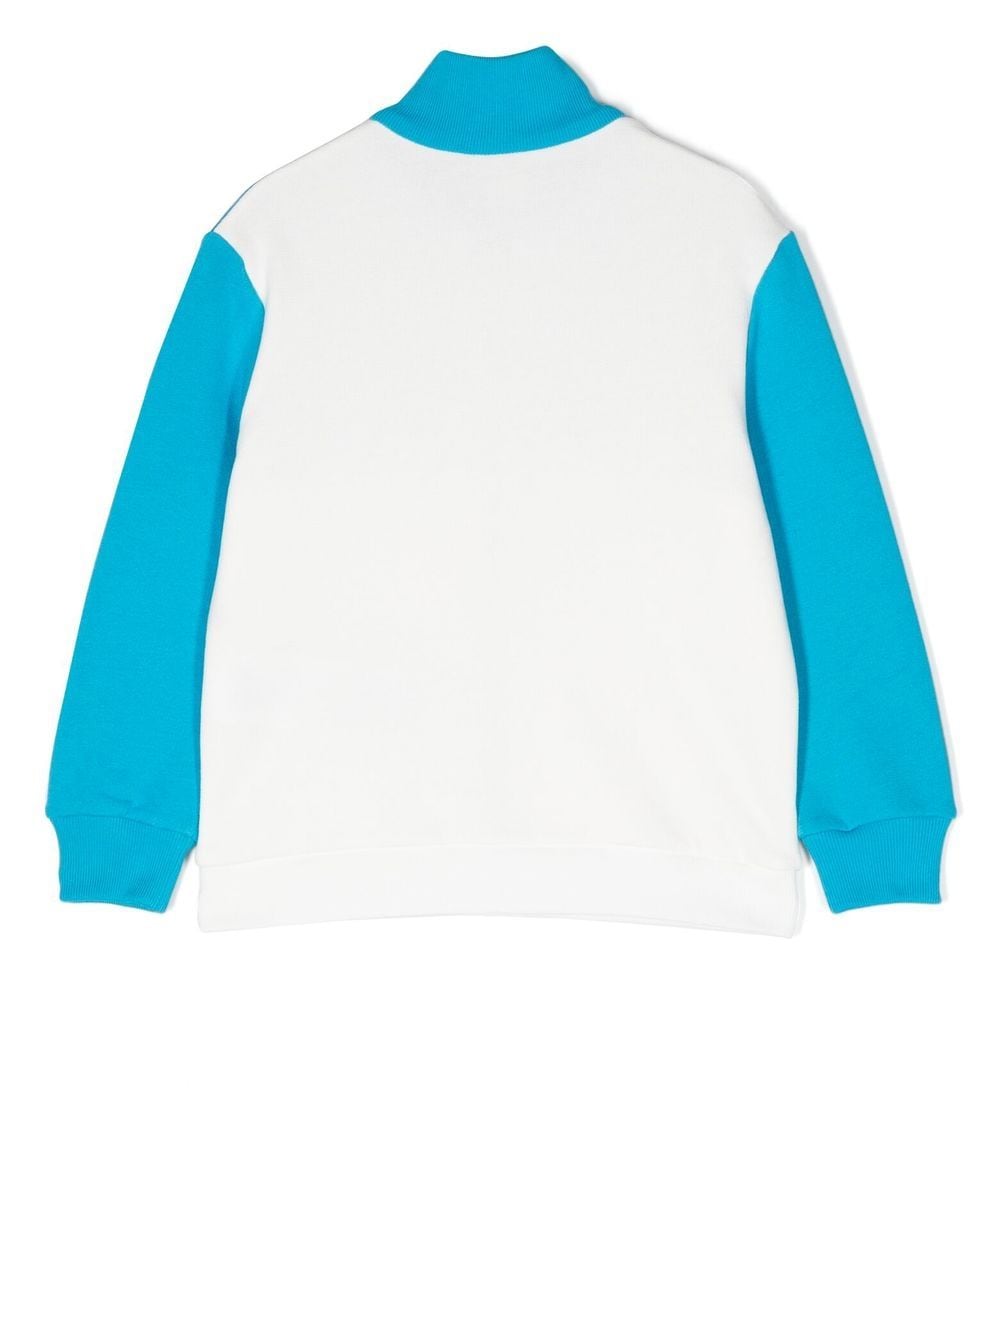 White and blue sweatshirt for boys